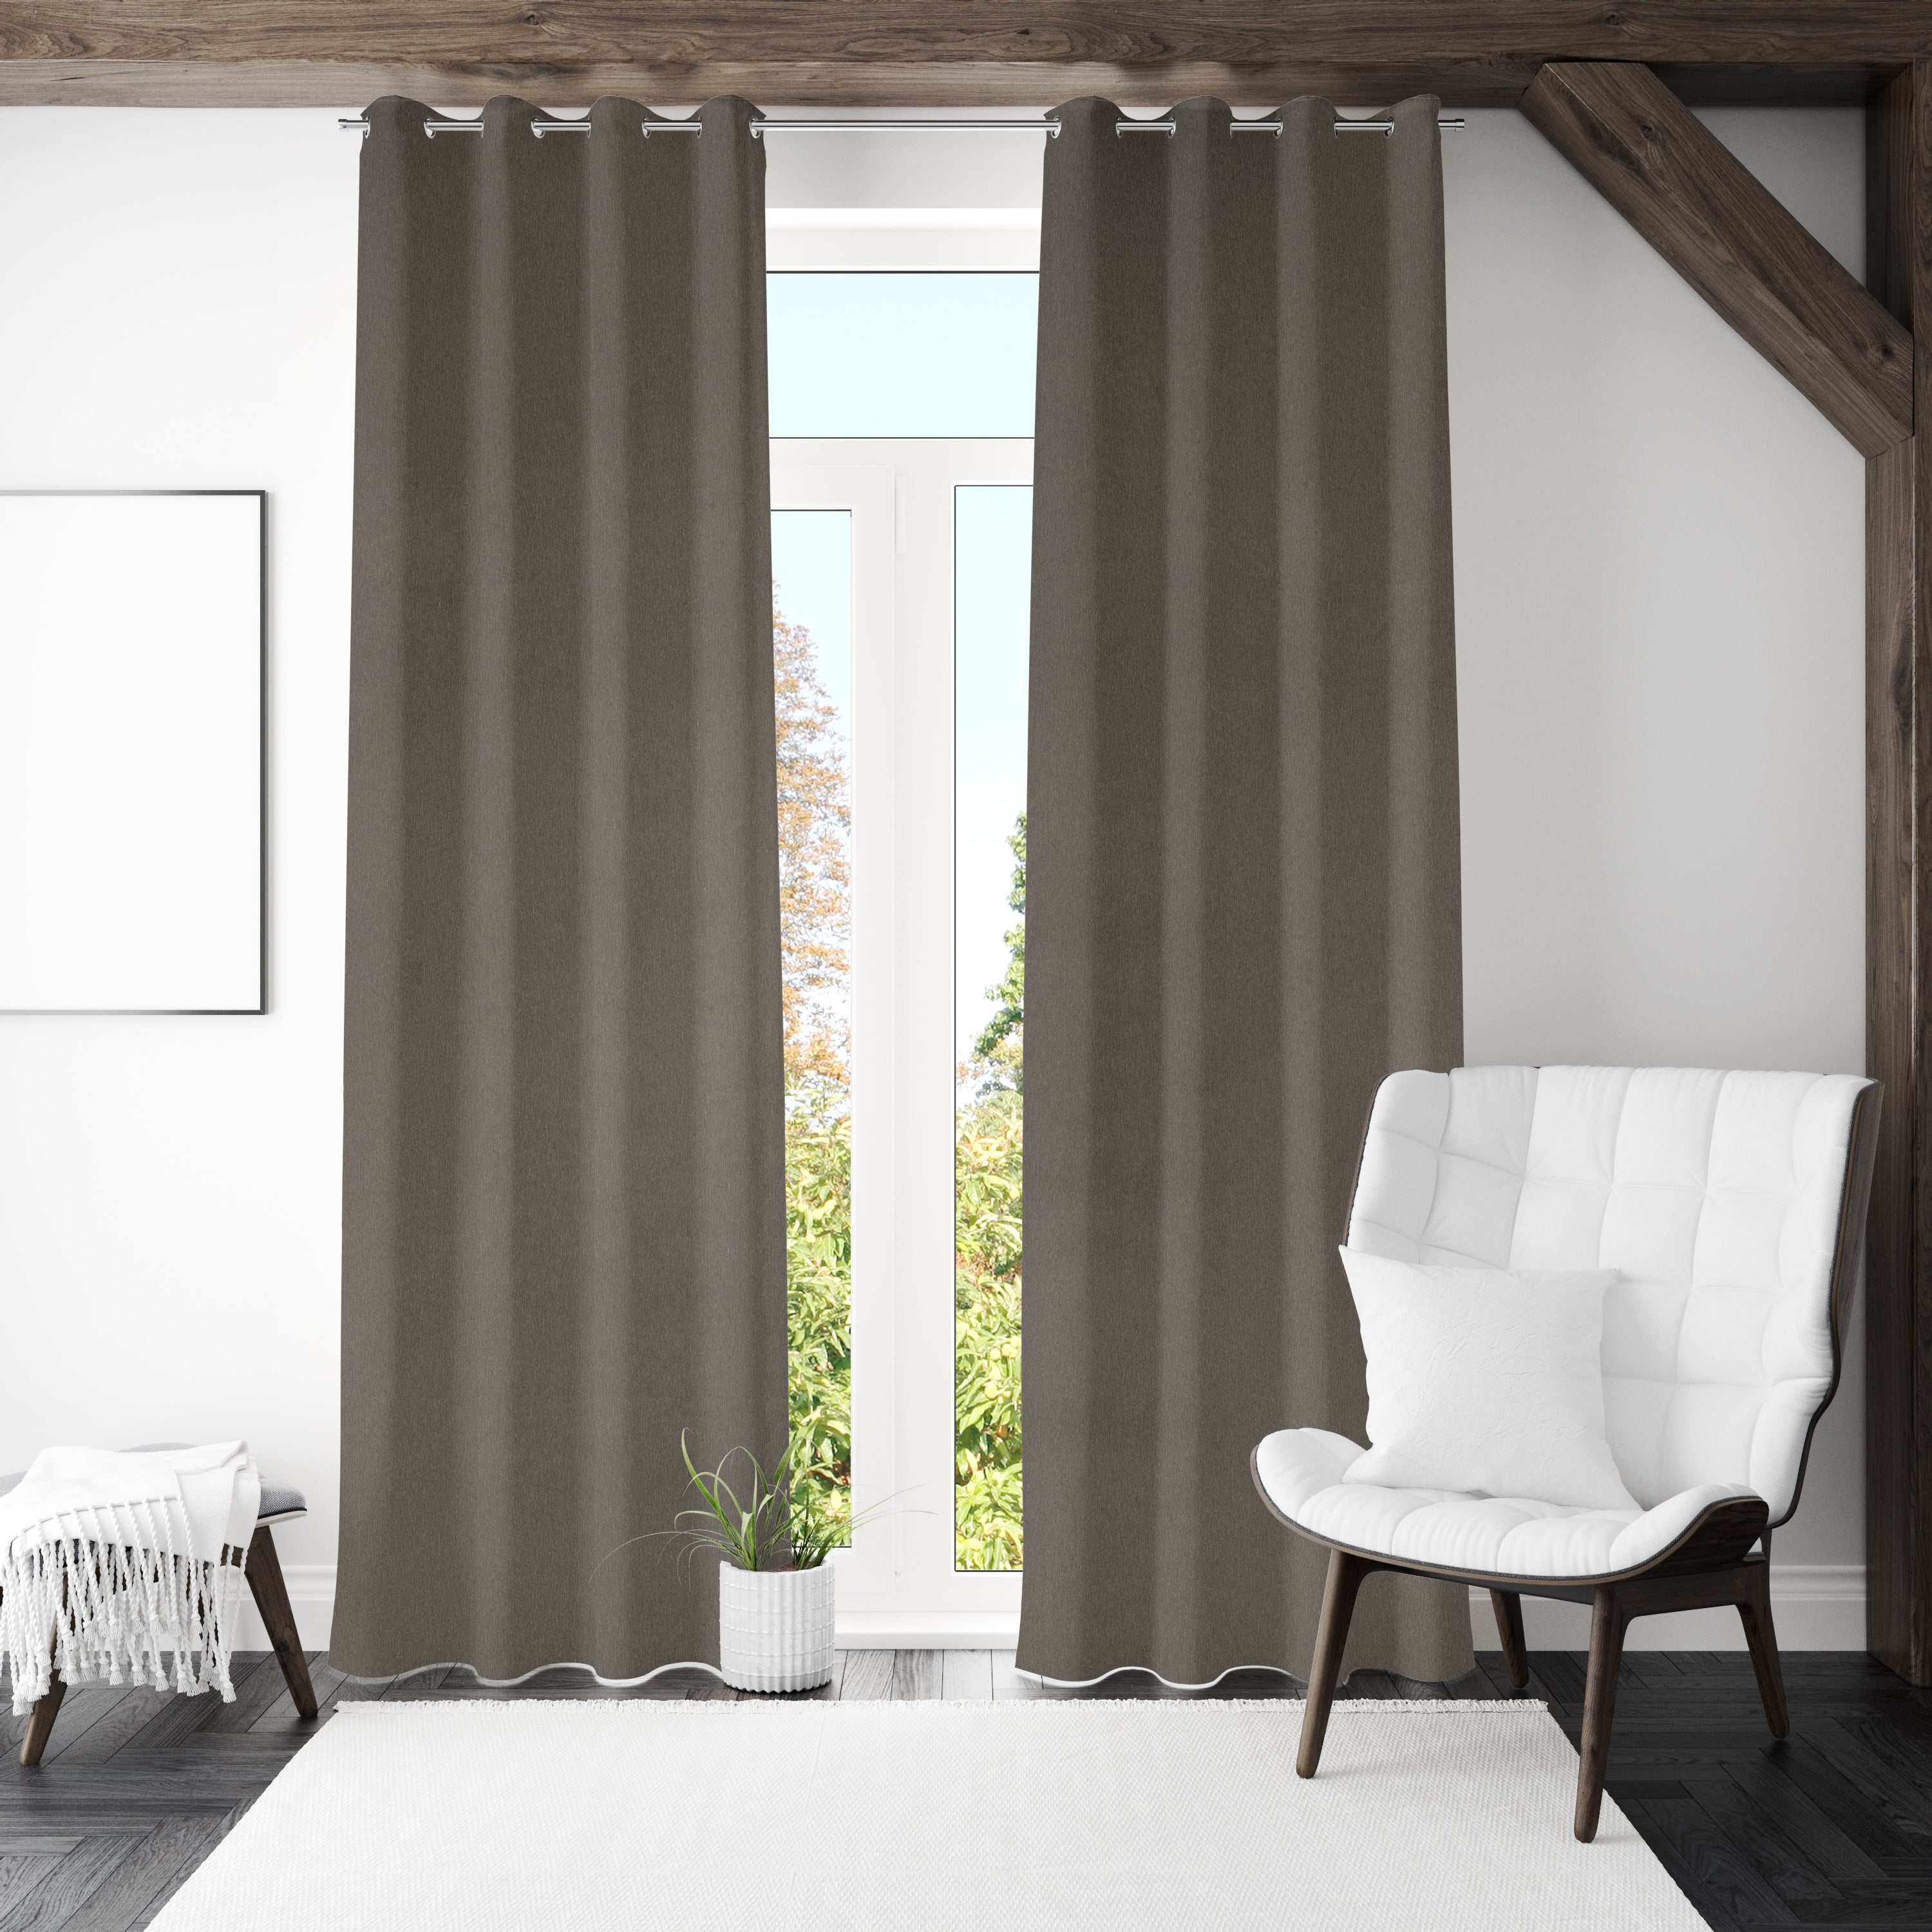 Visto Solid Blackout 9 Ft Polyester Long Door Curtains Set of 2 (Brown)